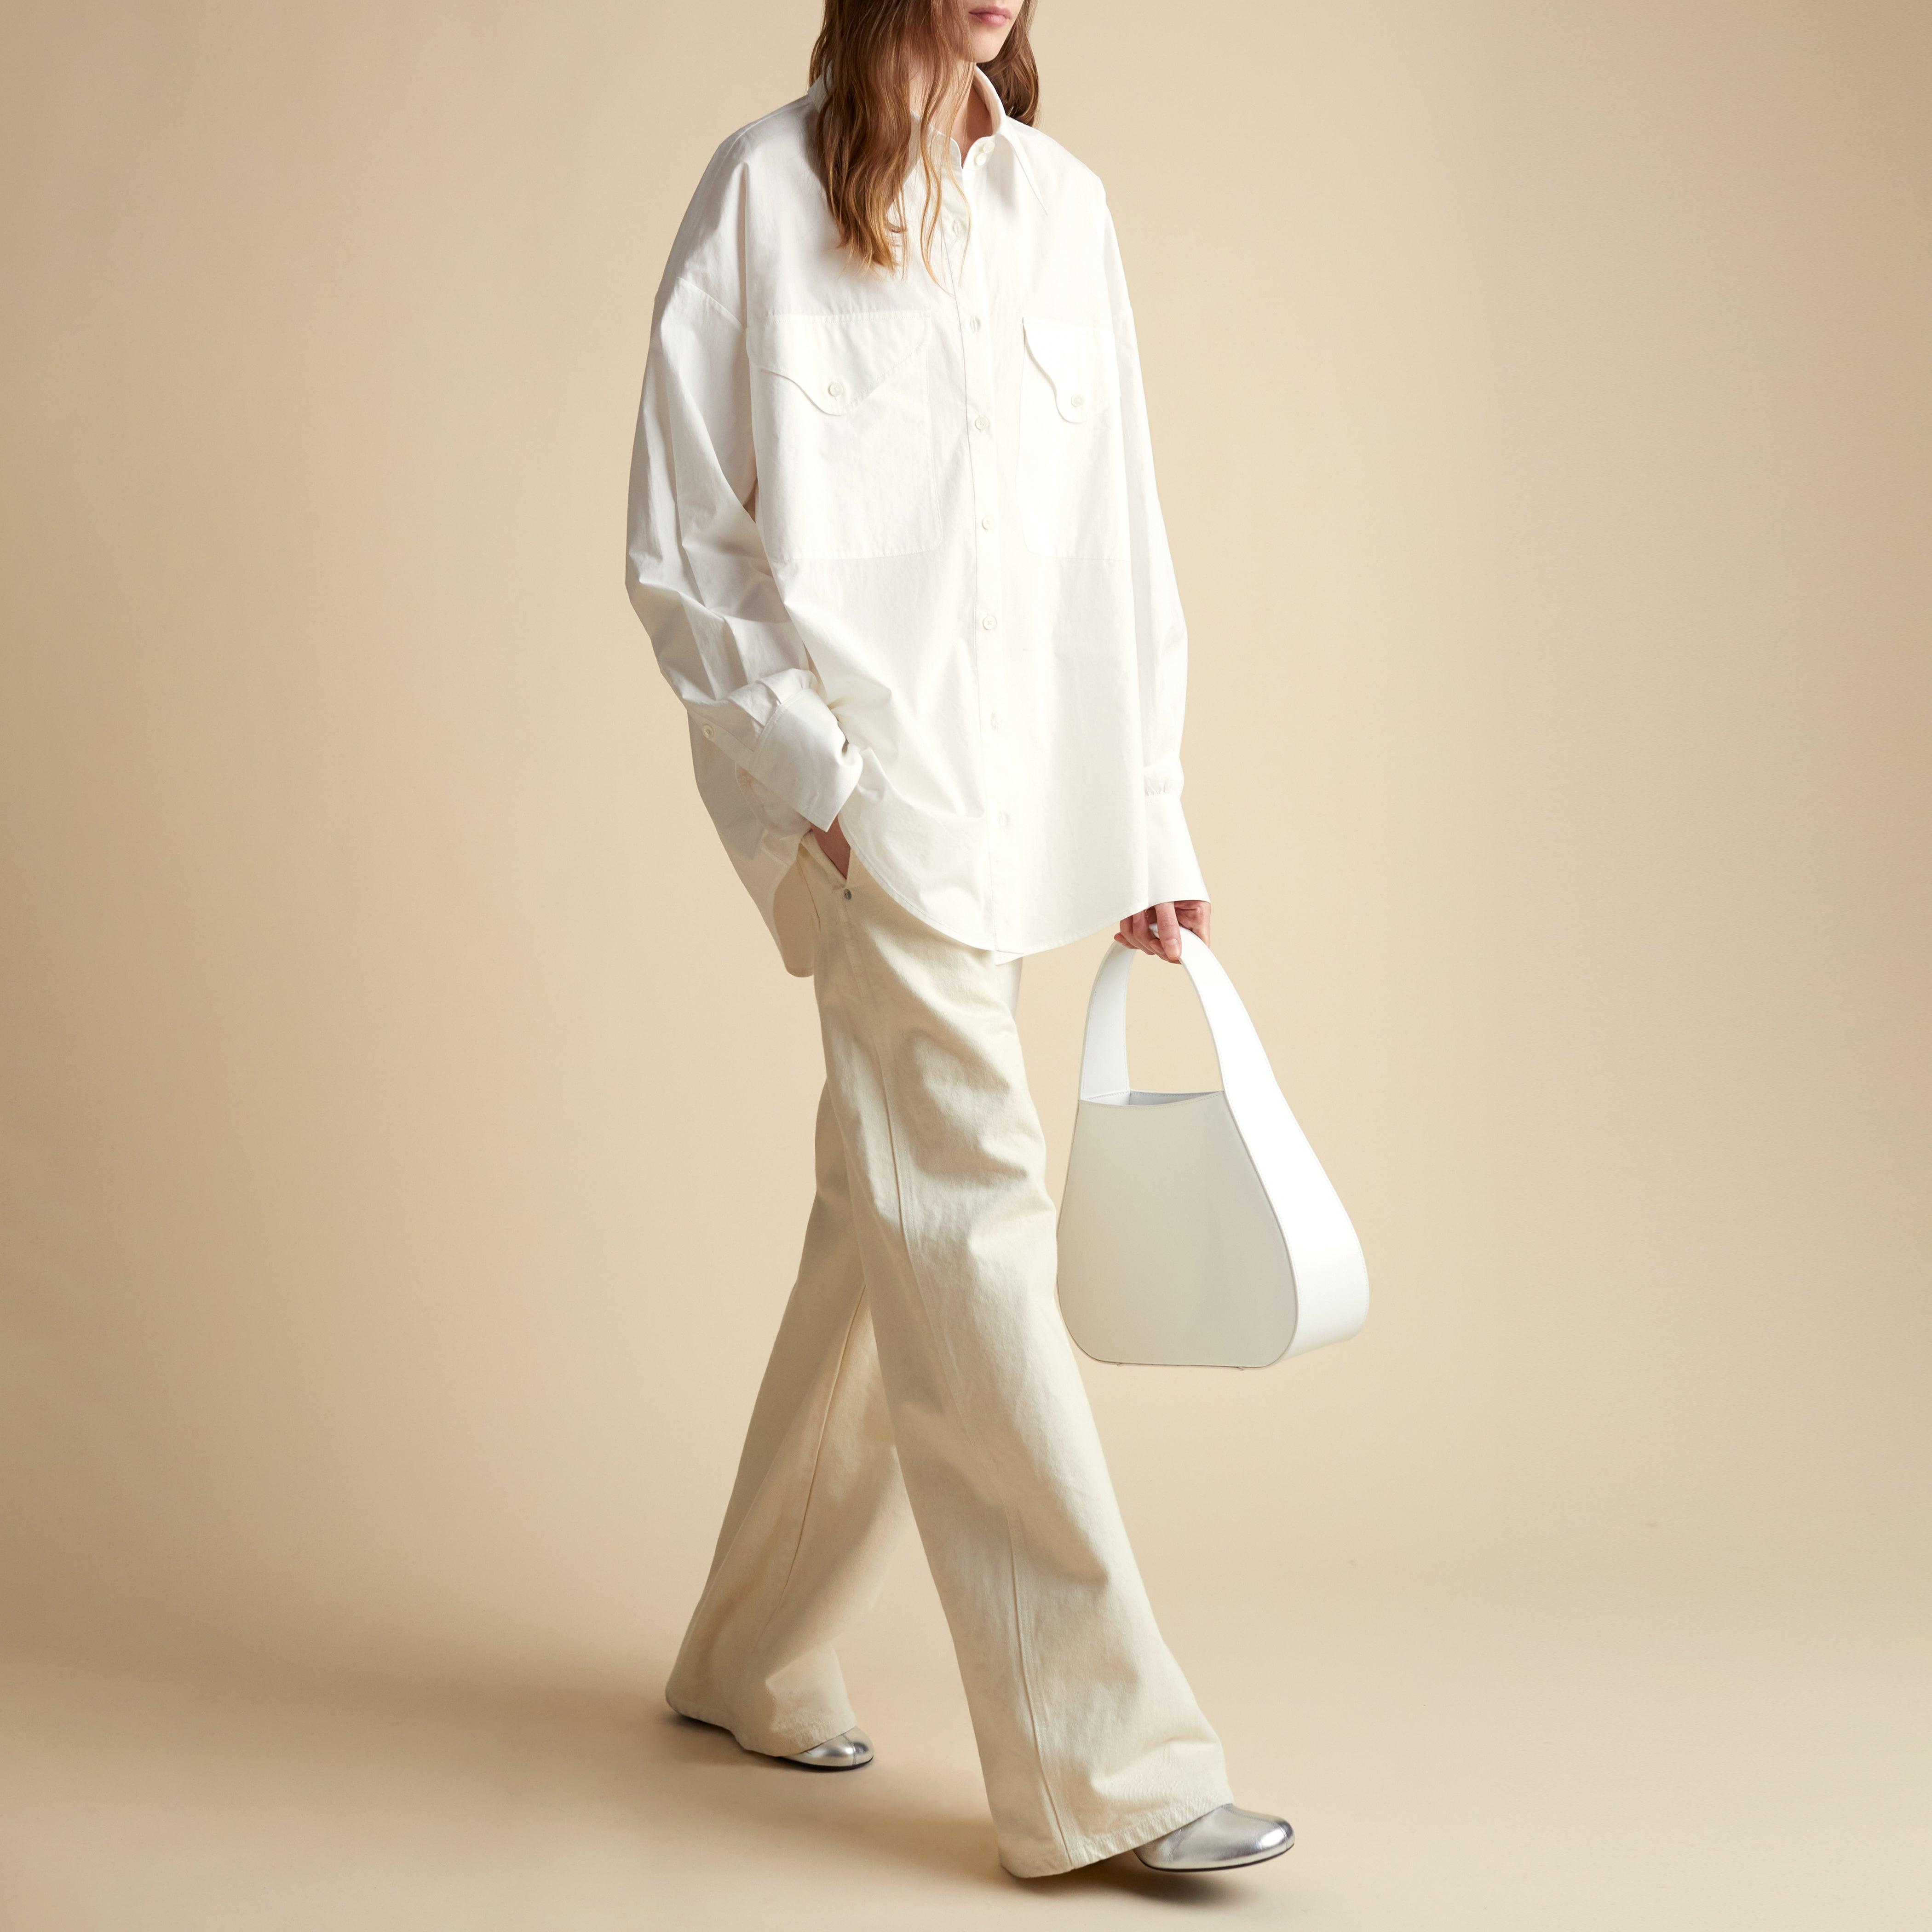 The Birdie Top in White - The Iconic Issue